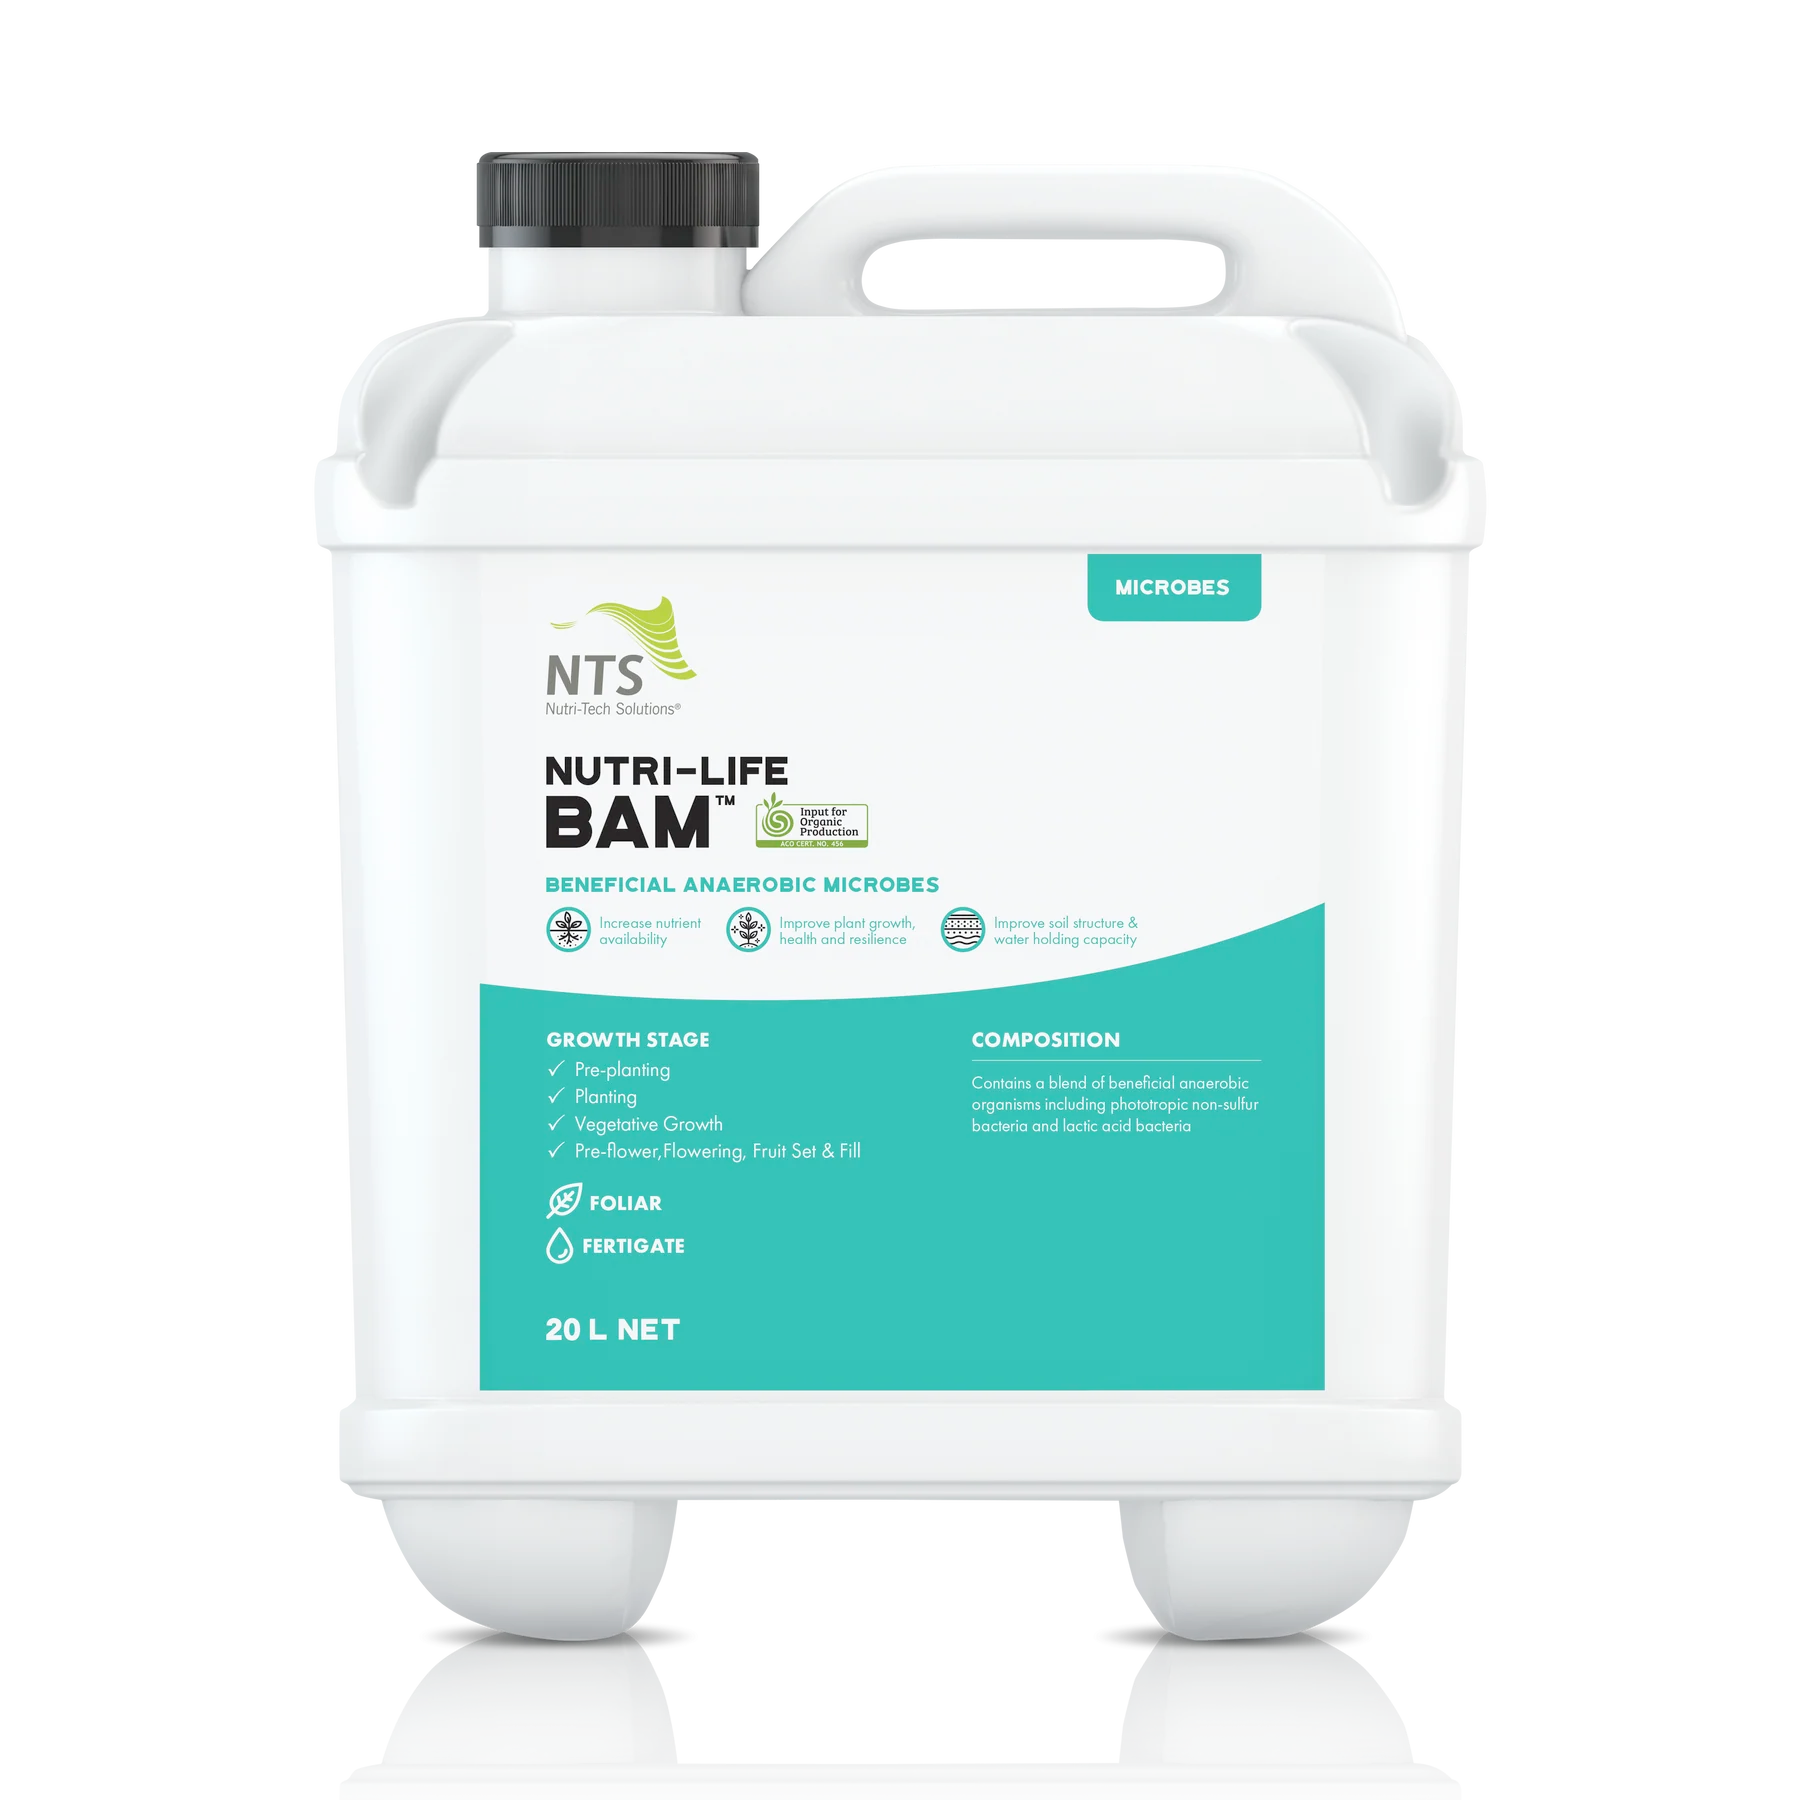 A photograph of a 20L drum of the NTS beneficial anaerobic microbes product called BAM™ 